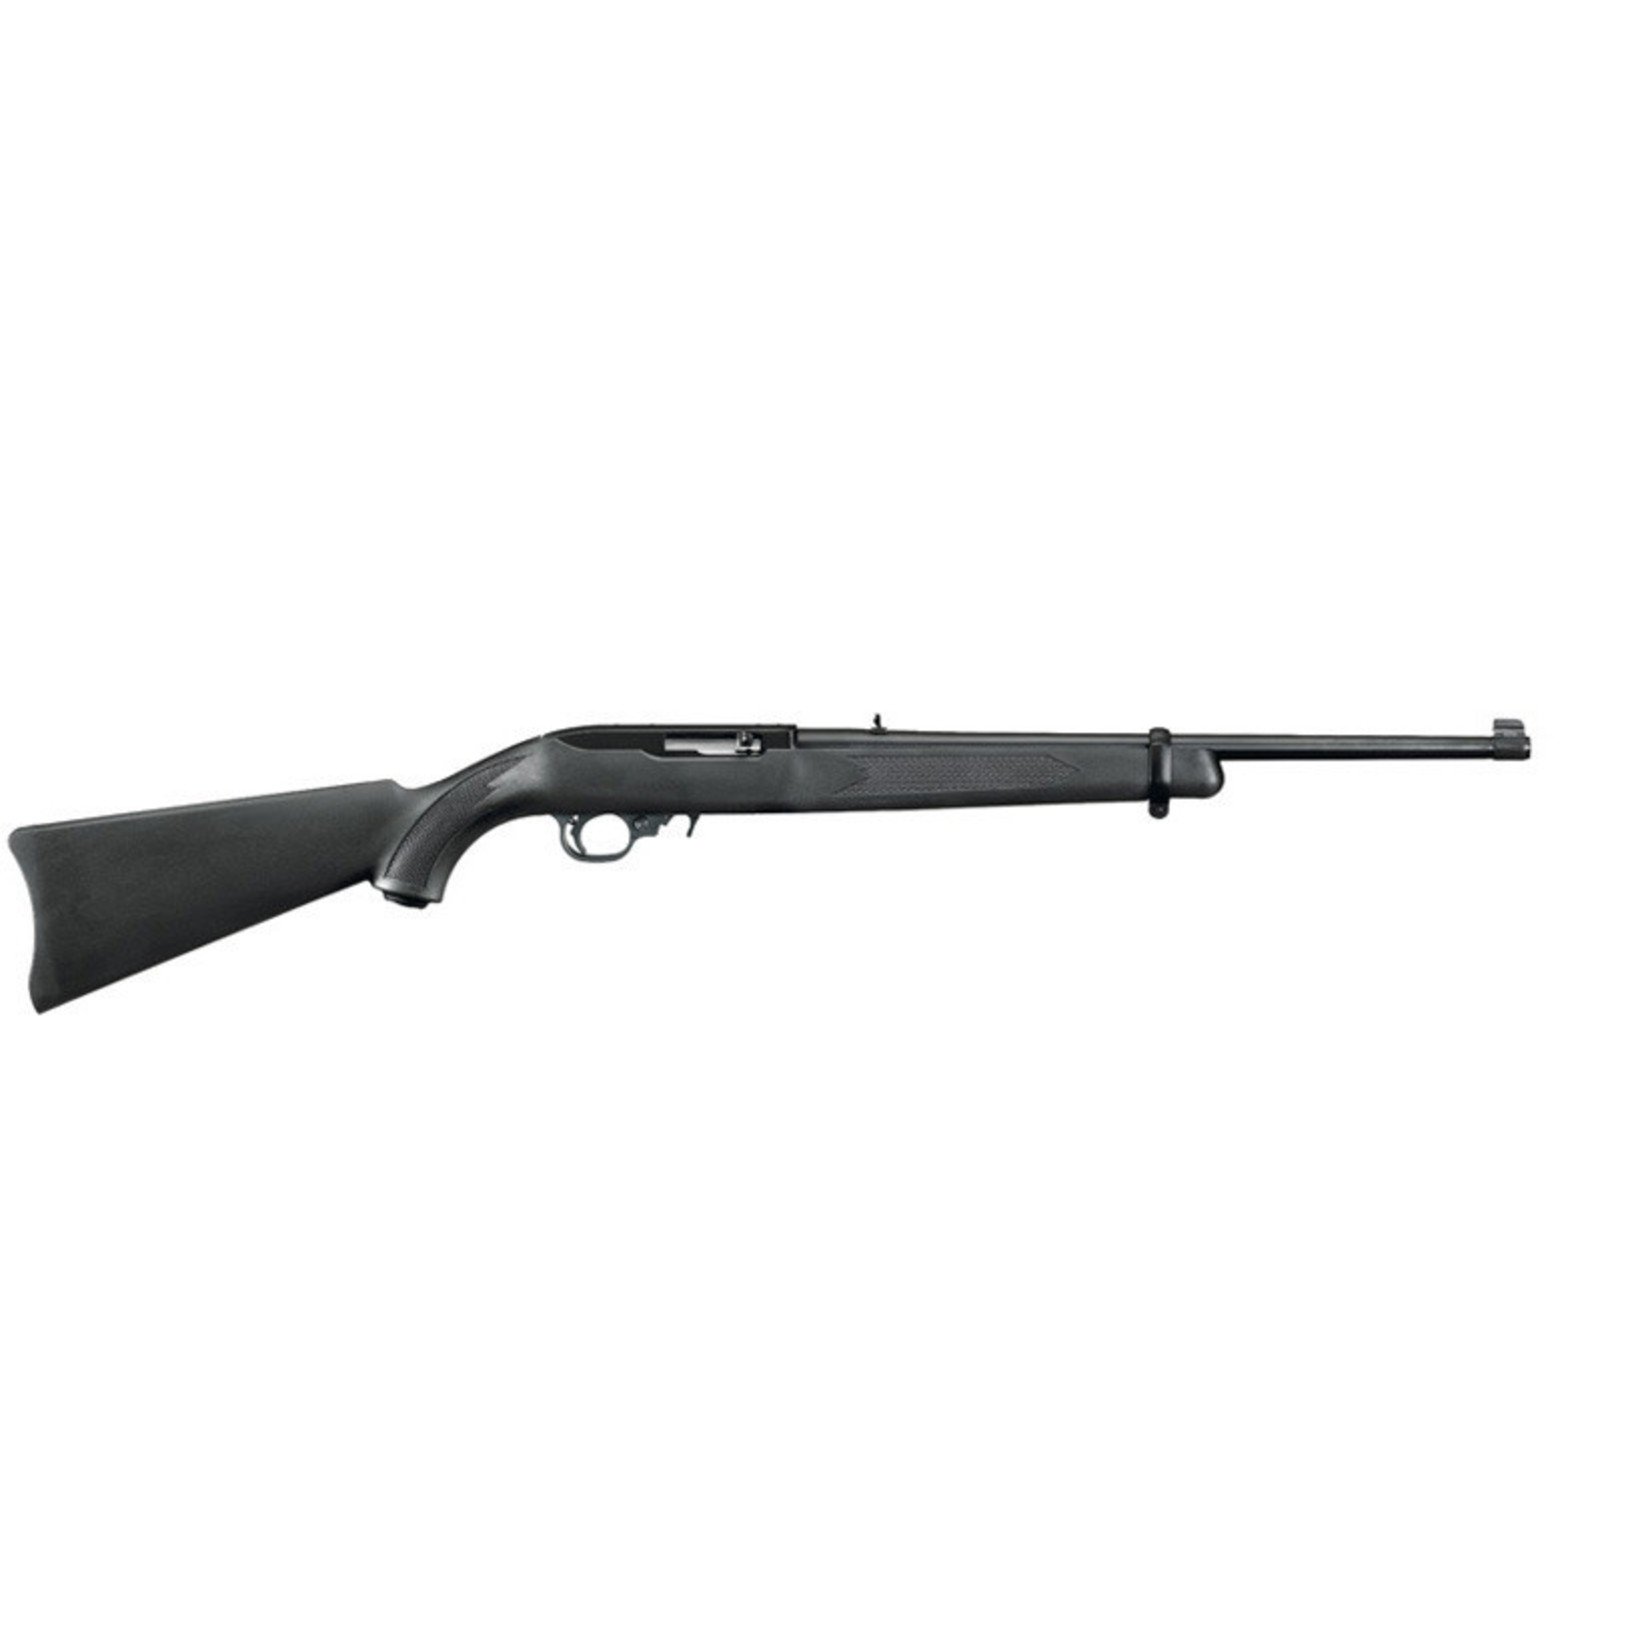 Ruger 10/22 - Triggers and Bows